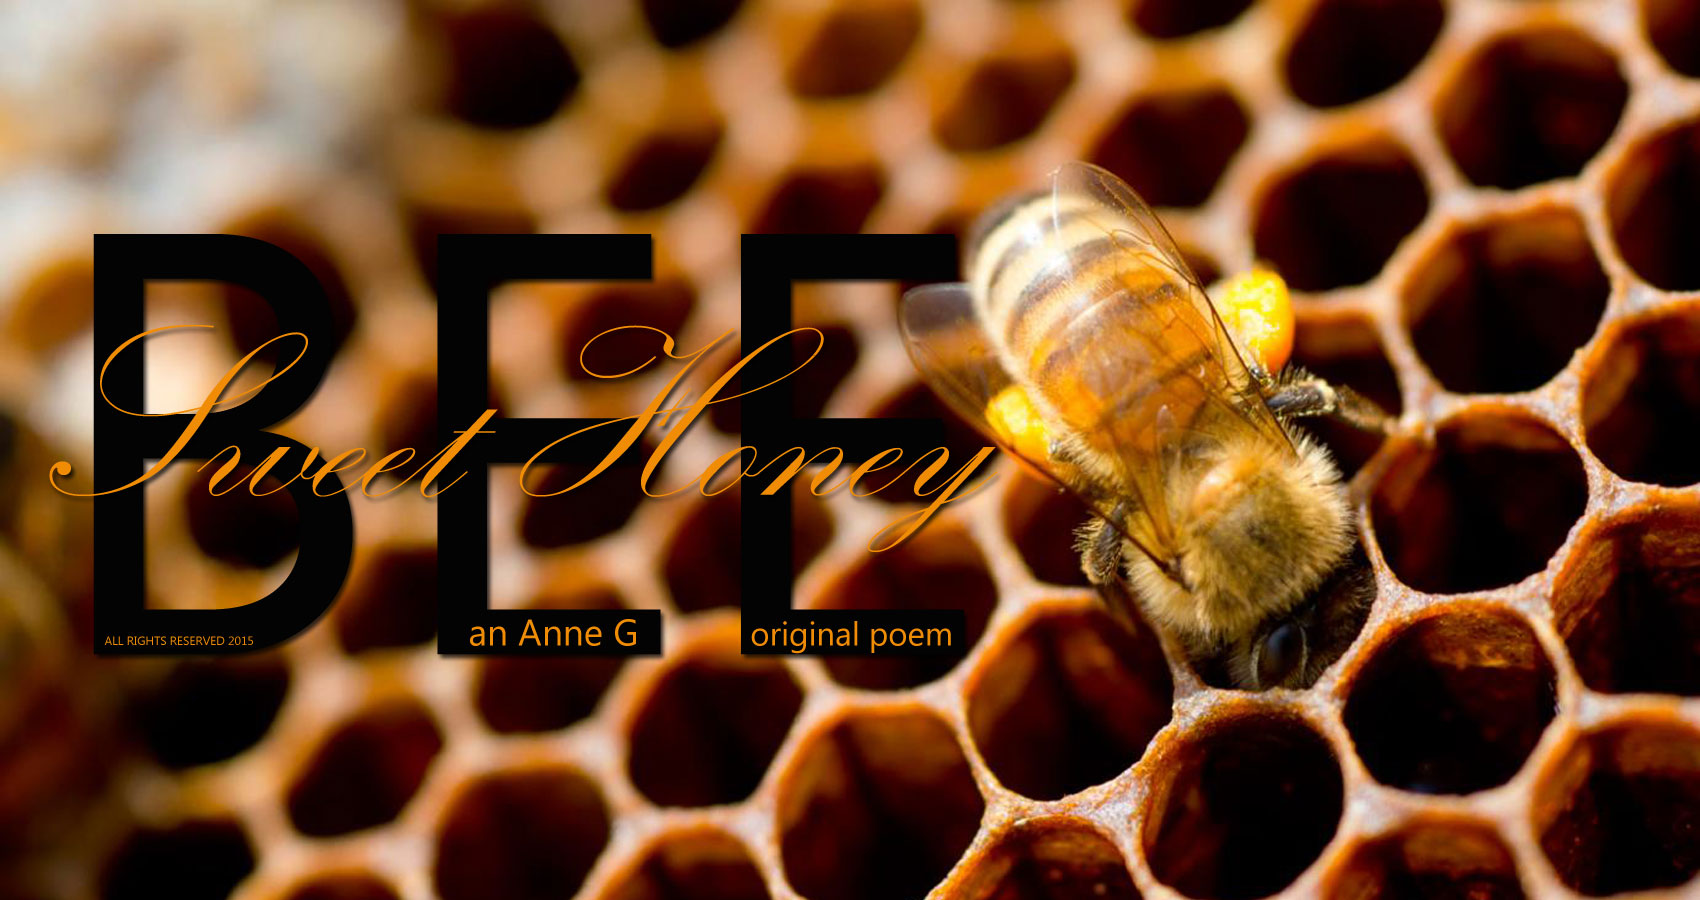 Download Sweet Honey Bee at spillwords.com